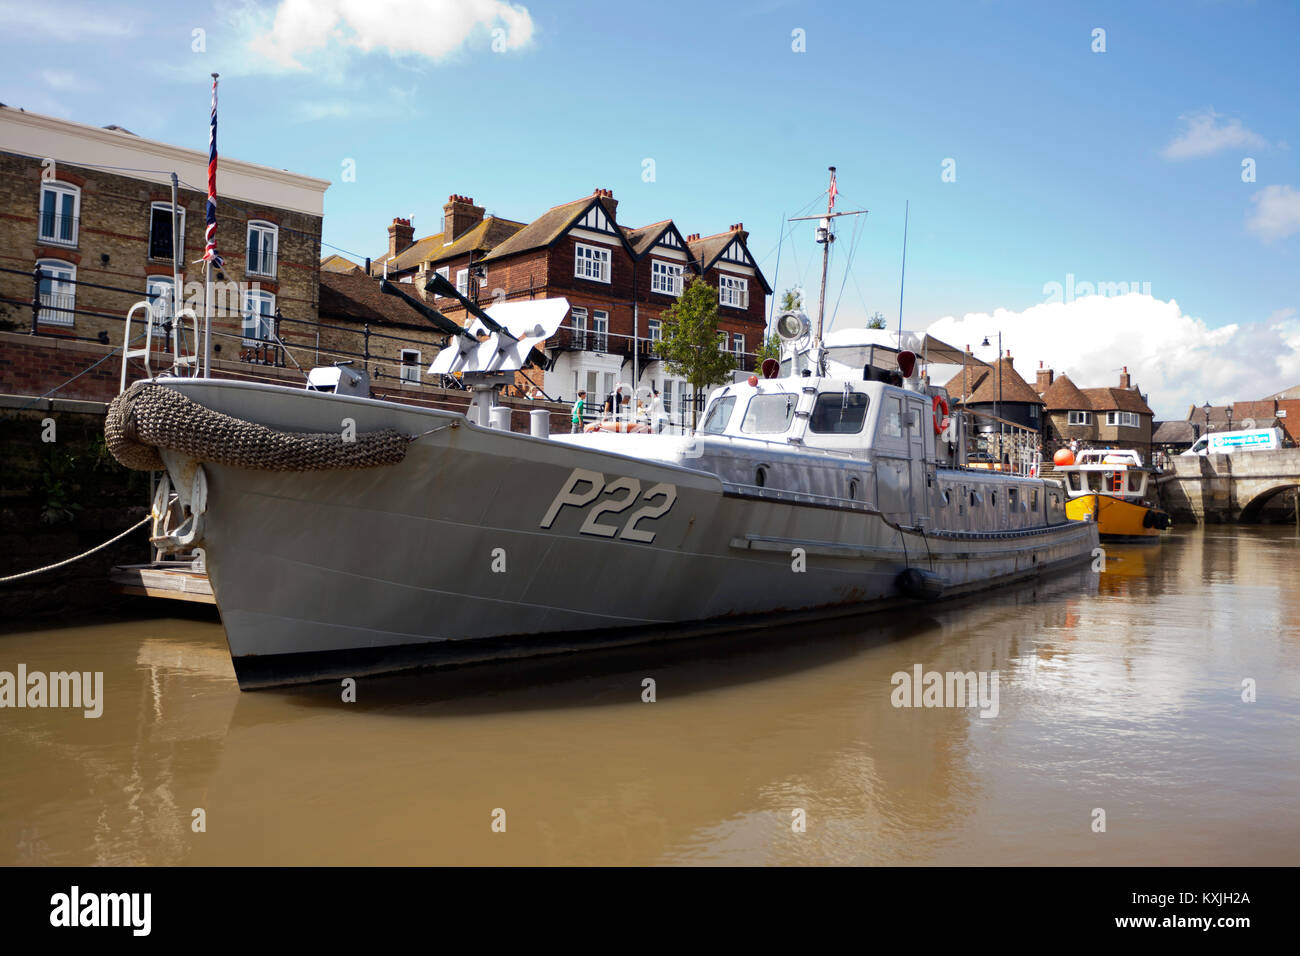 USN P22 (Rhine Maiden)  Gunboat  moored at the Quay, Sandwich Kent Stock Photo